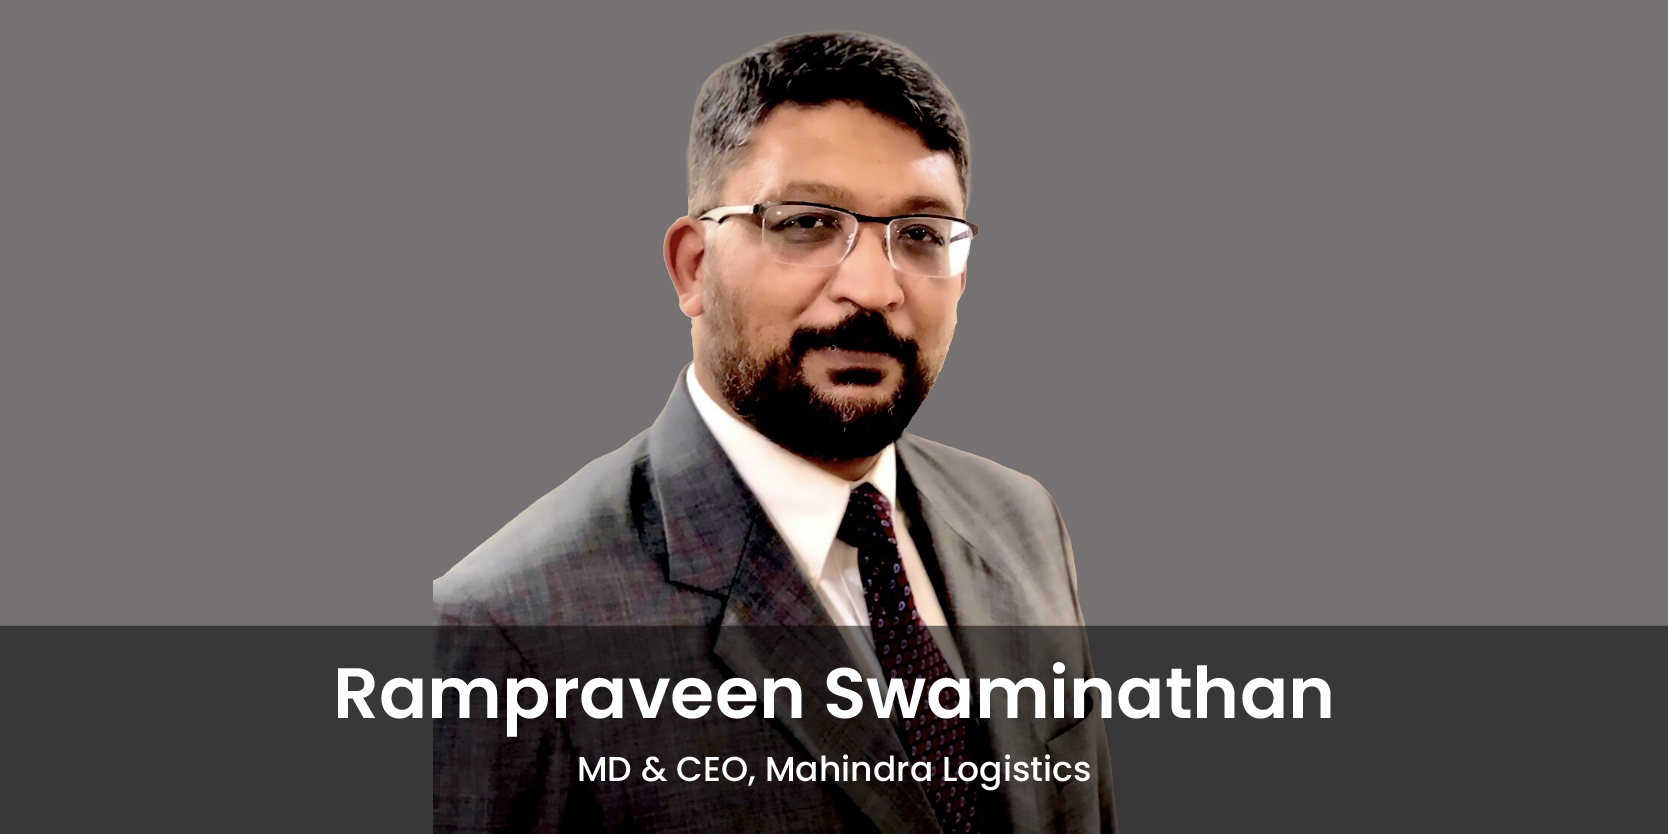 Mahindra Logistics targets growth in enterprise mobility